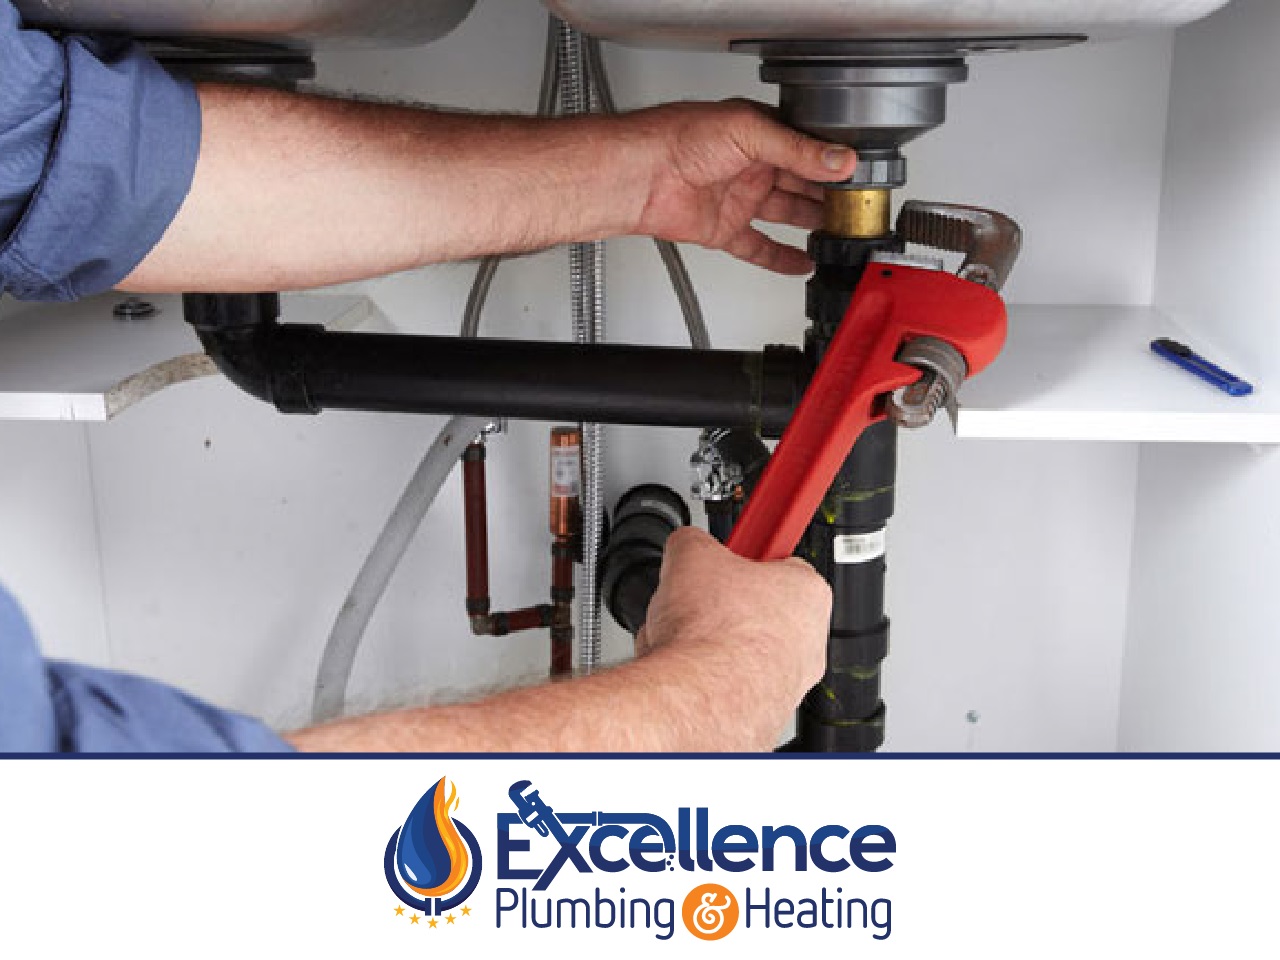 Innovation at its Finest: Excellence Plumbing Service Union Introduces Cutting-Edge Heating Solutions